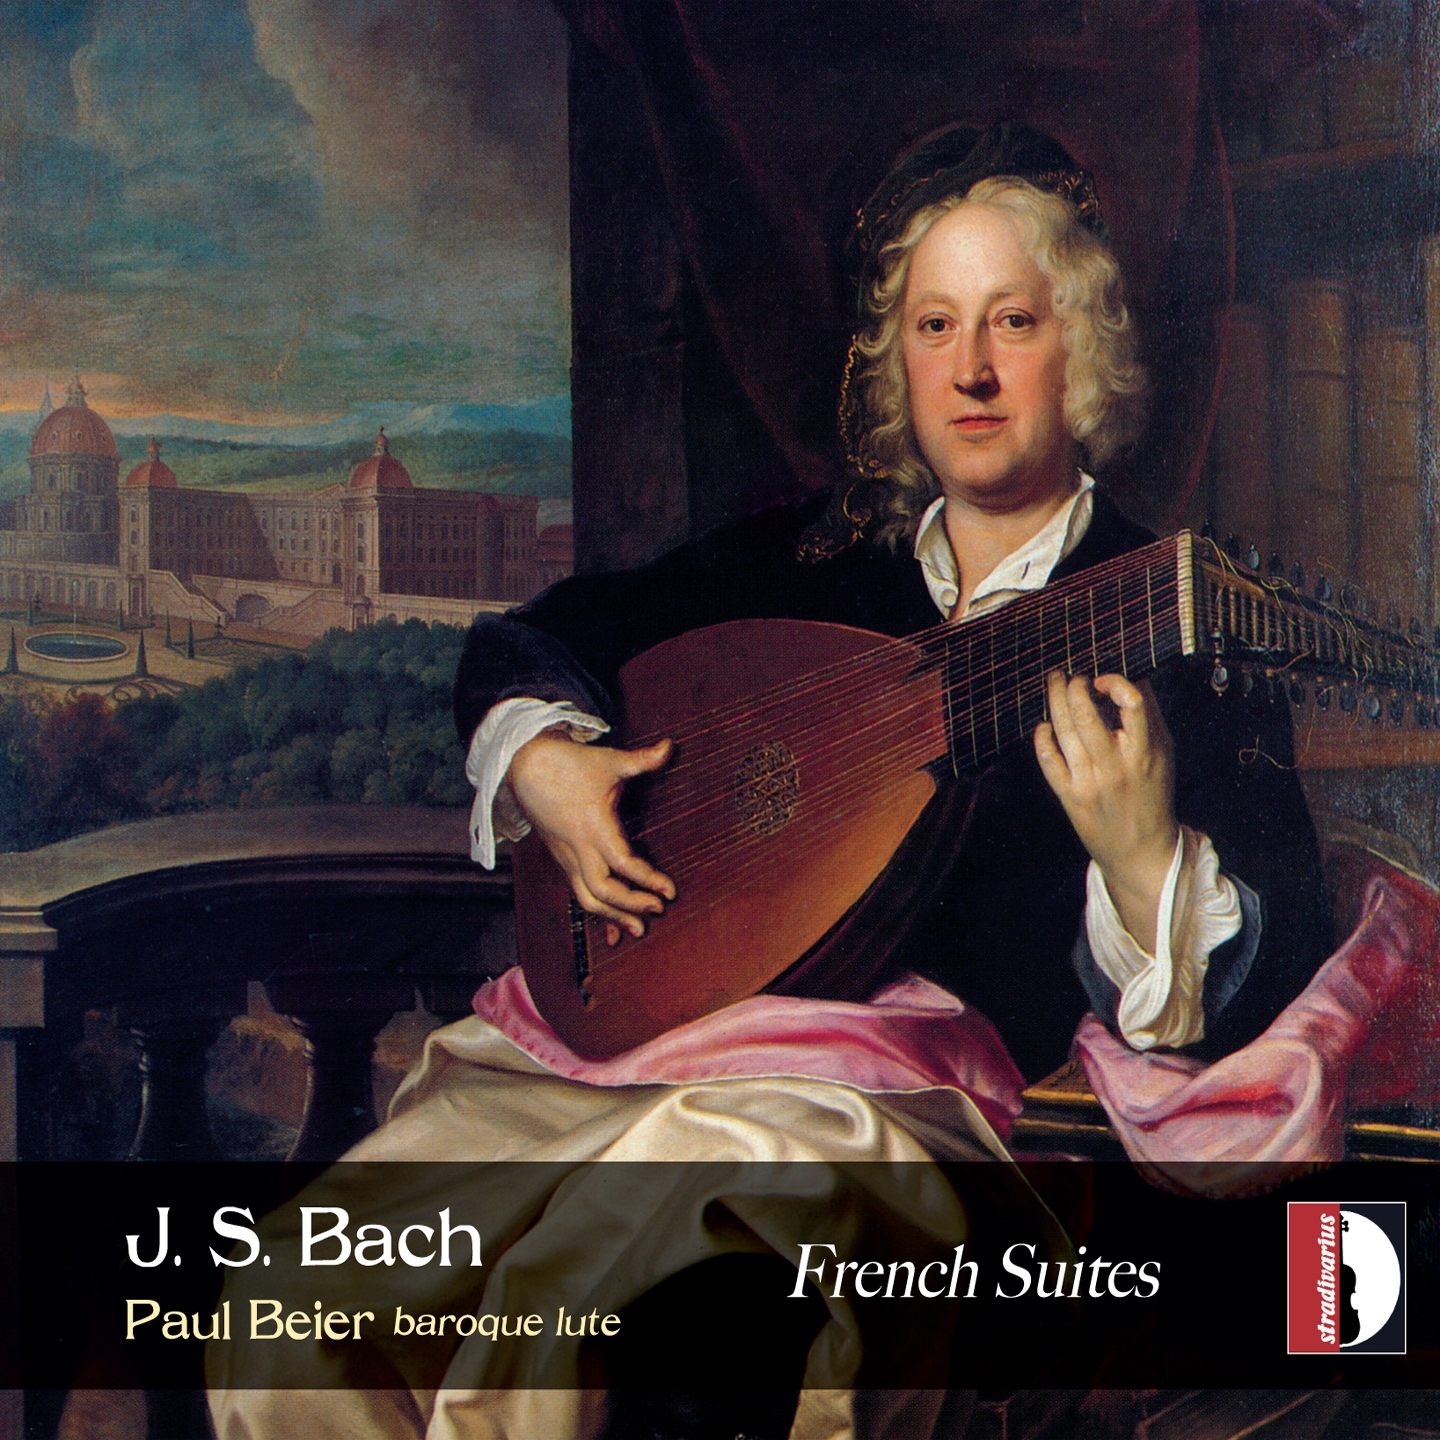 6 French Suites, No. 2 in C Minor, BWV 813: III. Sarabande (Transcription for Lute)